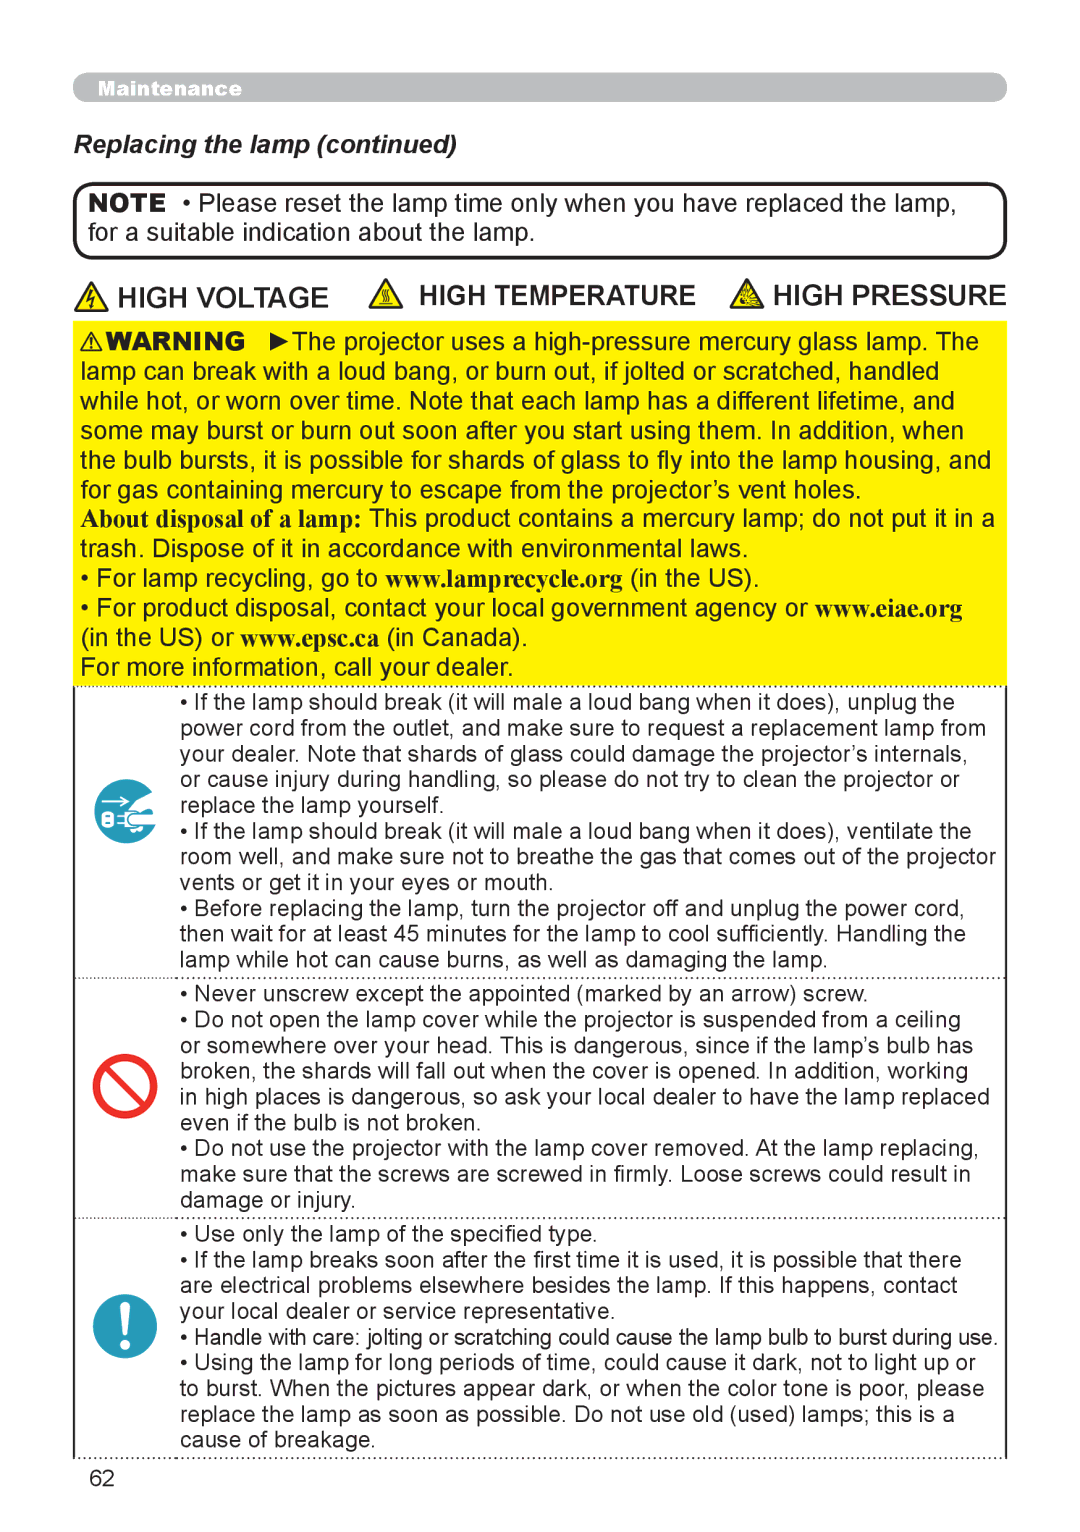 Epson 8100 user manual High Voltage High Temperature, Replacing the lamp 